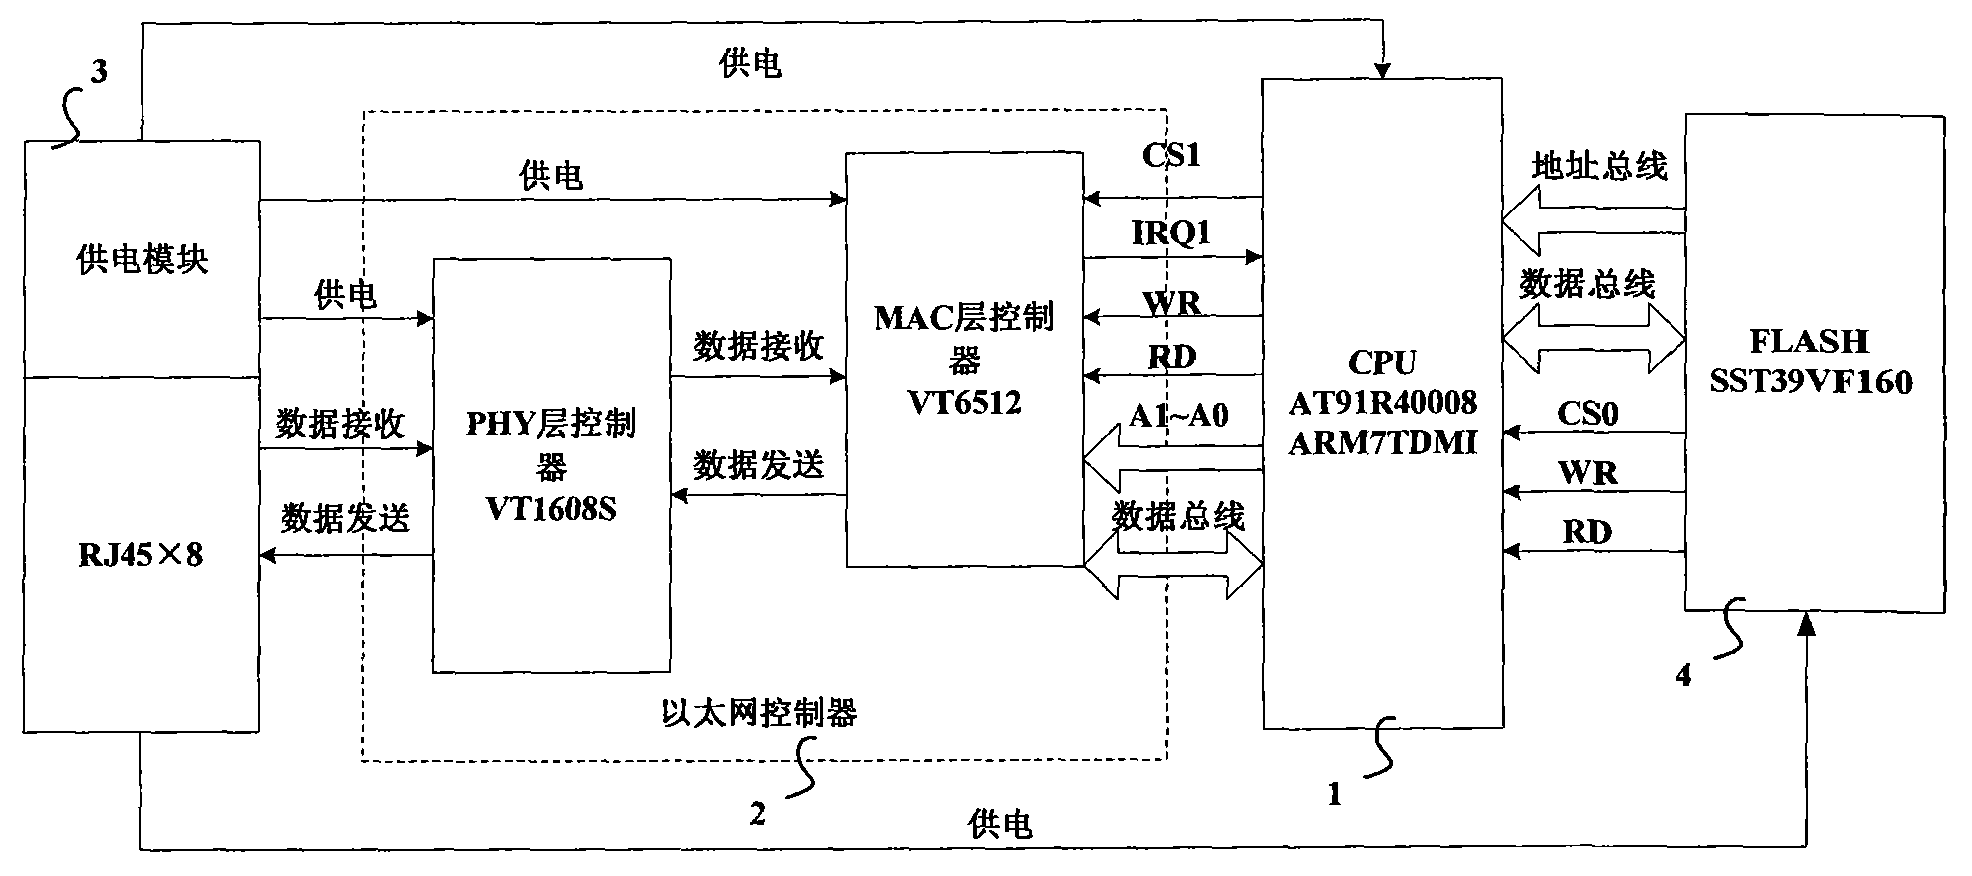 Industrial Ethernet exchanger and message forwarding method based on EPA protocol